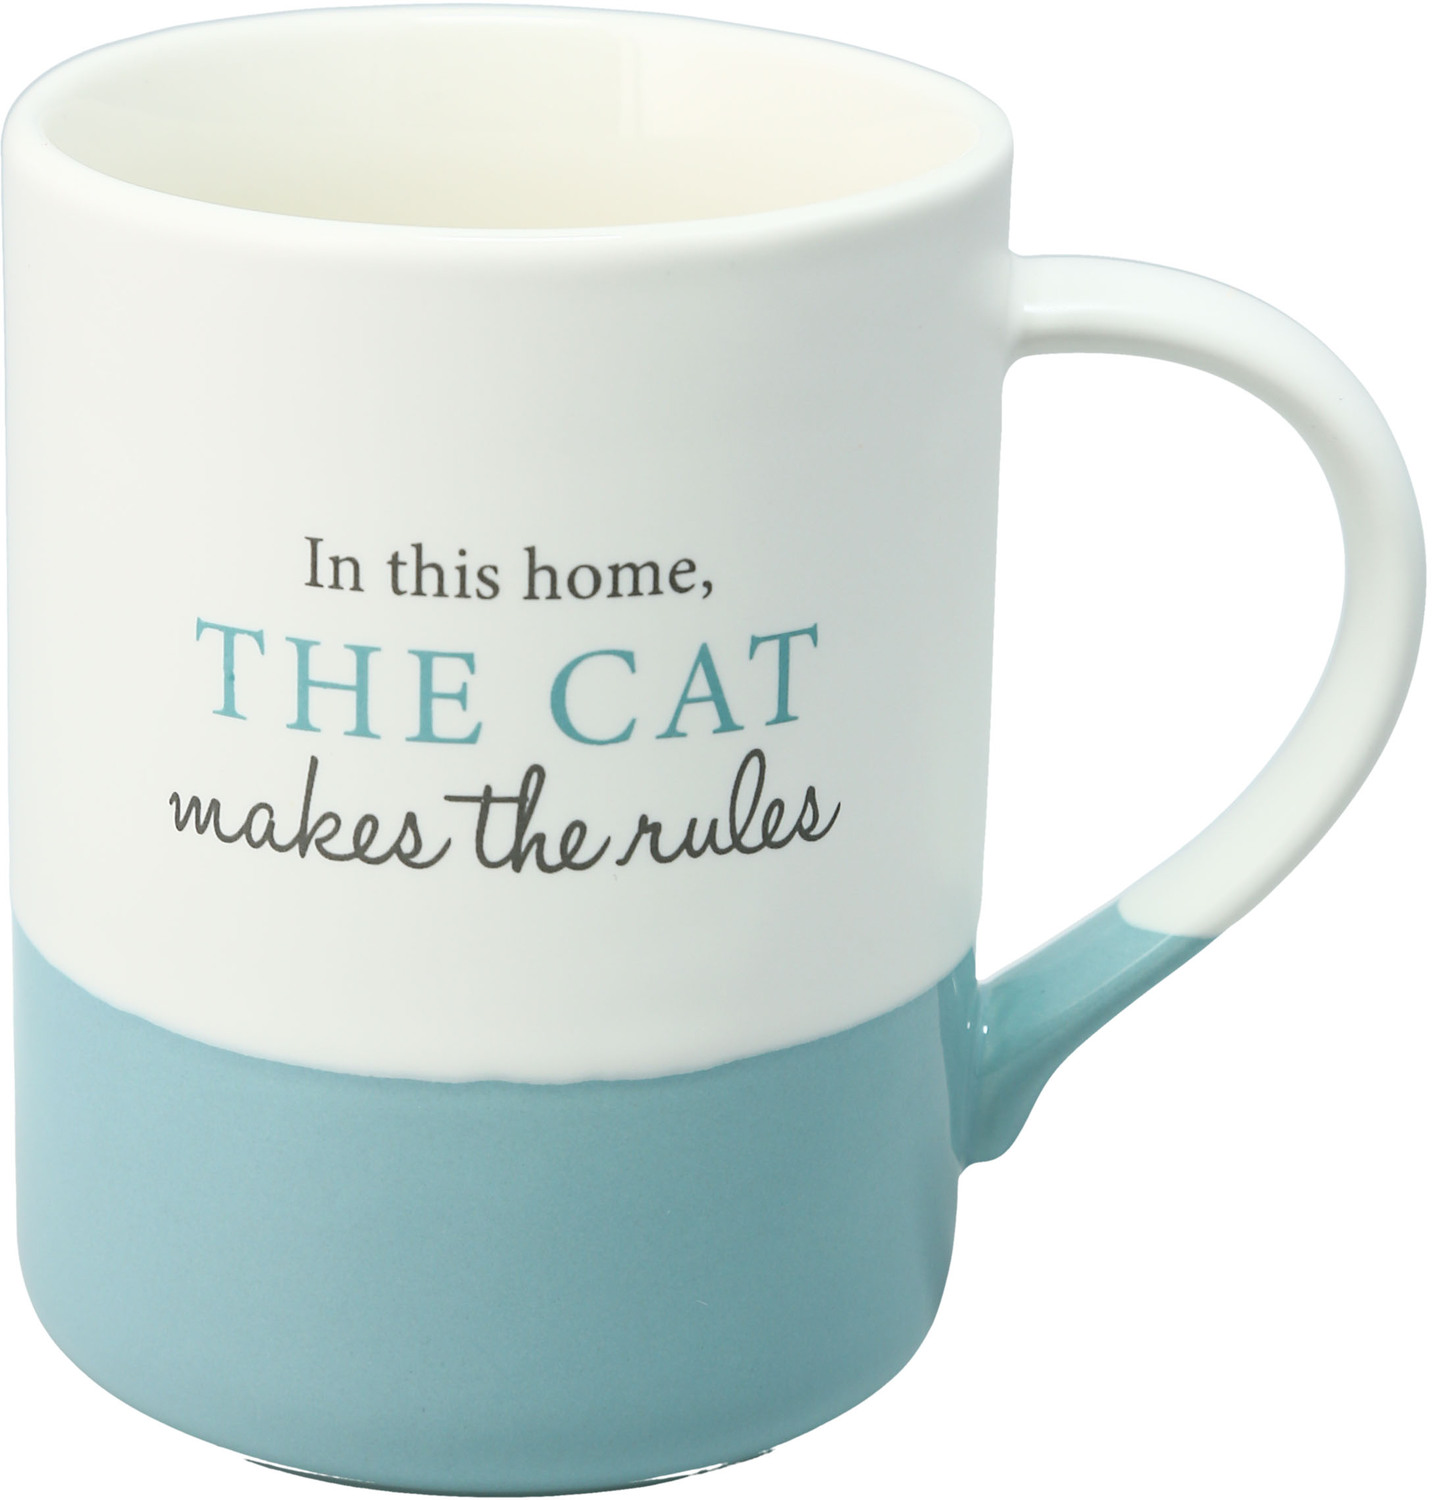 The Cat by A-Parent-ly - The Cat - 18 oz Mug